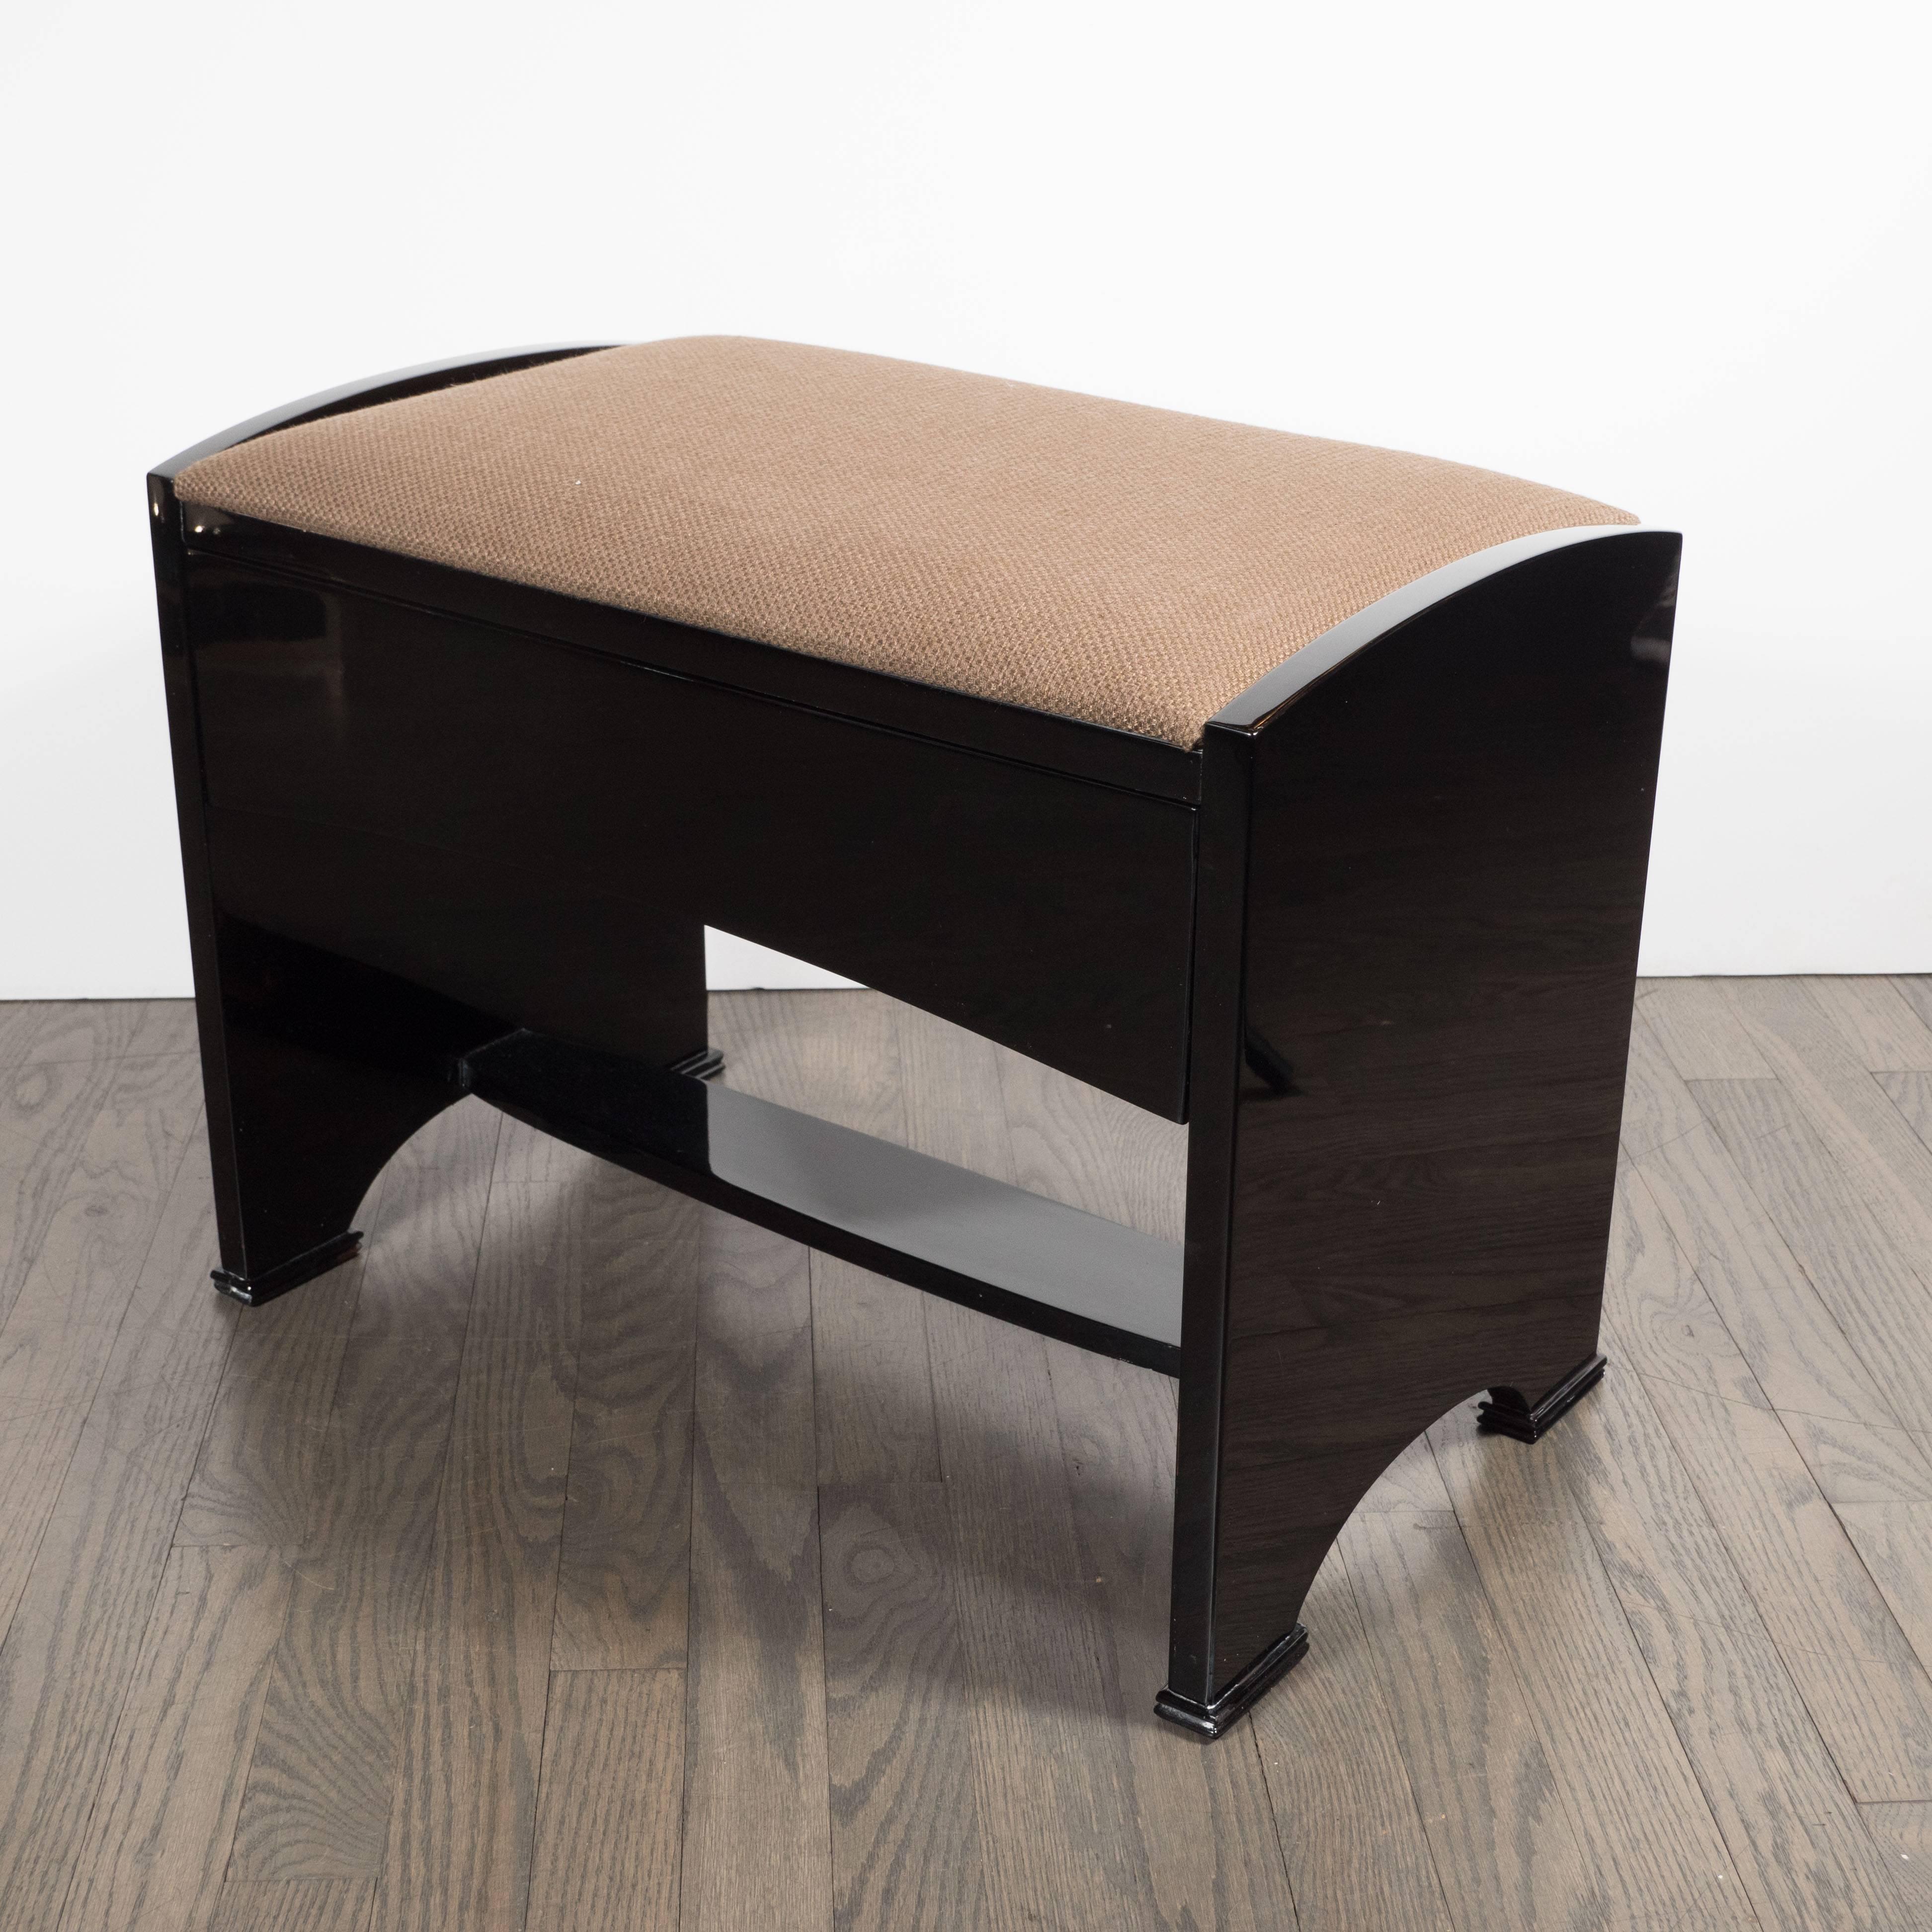 This refined streamlined Art Deco bench was realized in the United States, circa 1935. It features two lustrous black lacquer sides with subtly bowed tops and bottoms, as well as rectangular feet. It also offers a spacious drawer, perfect for